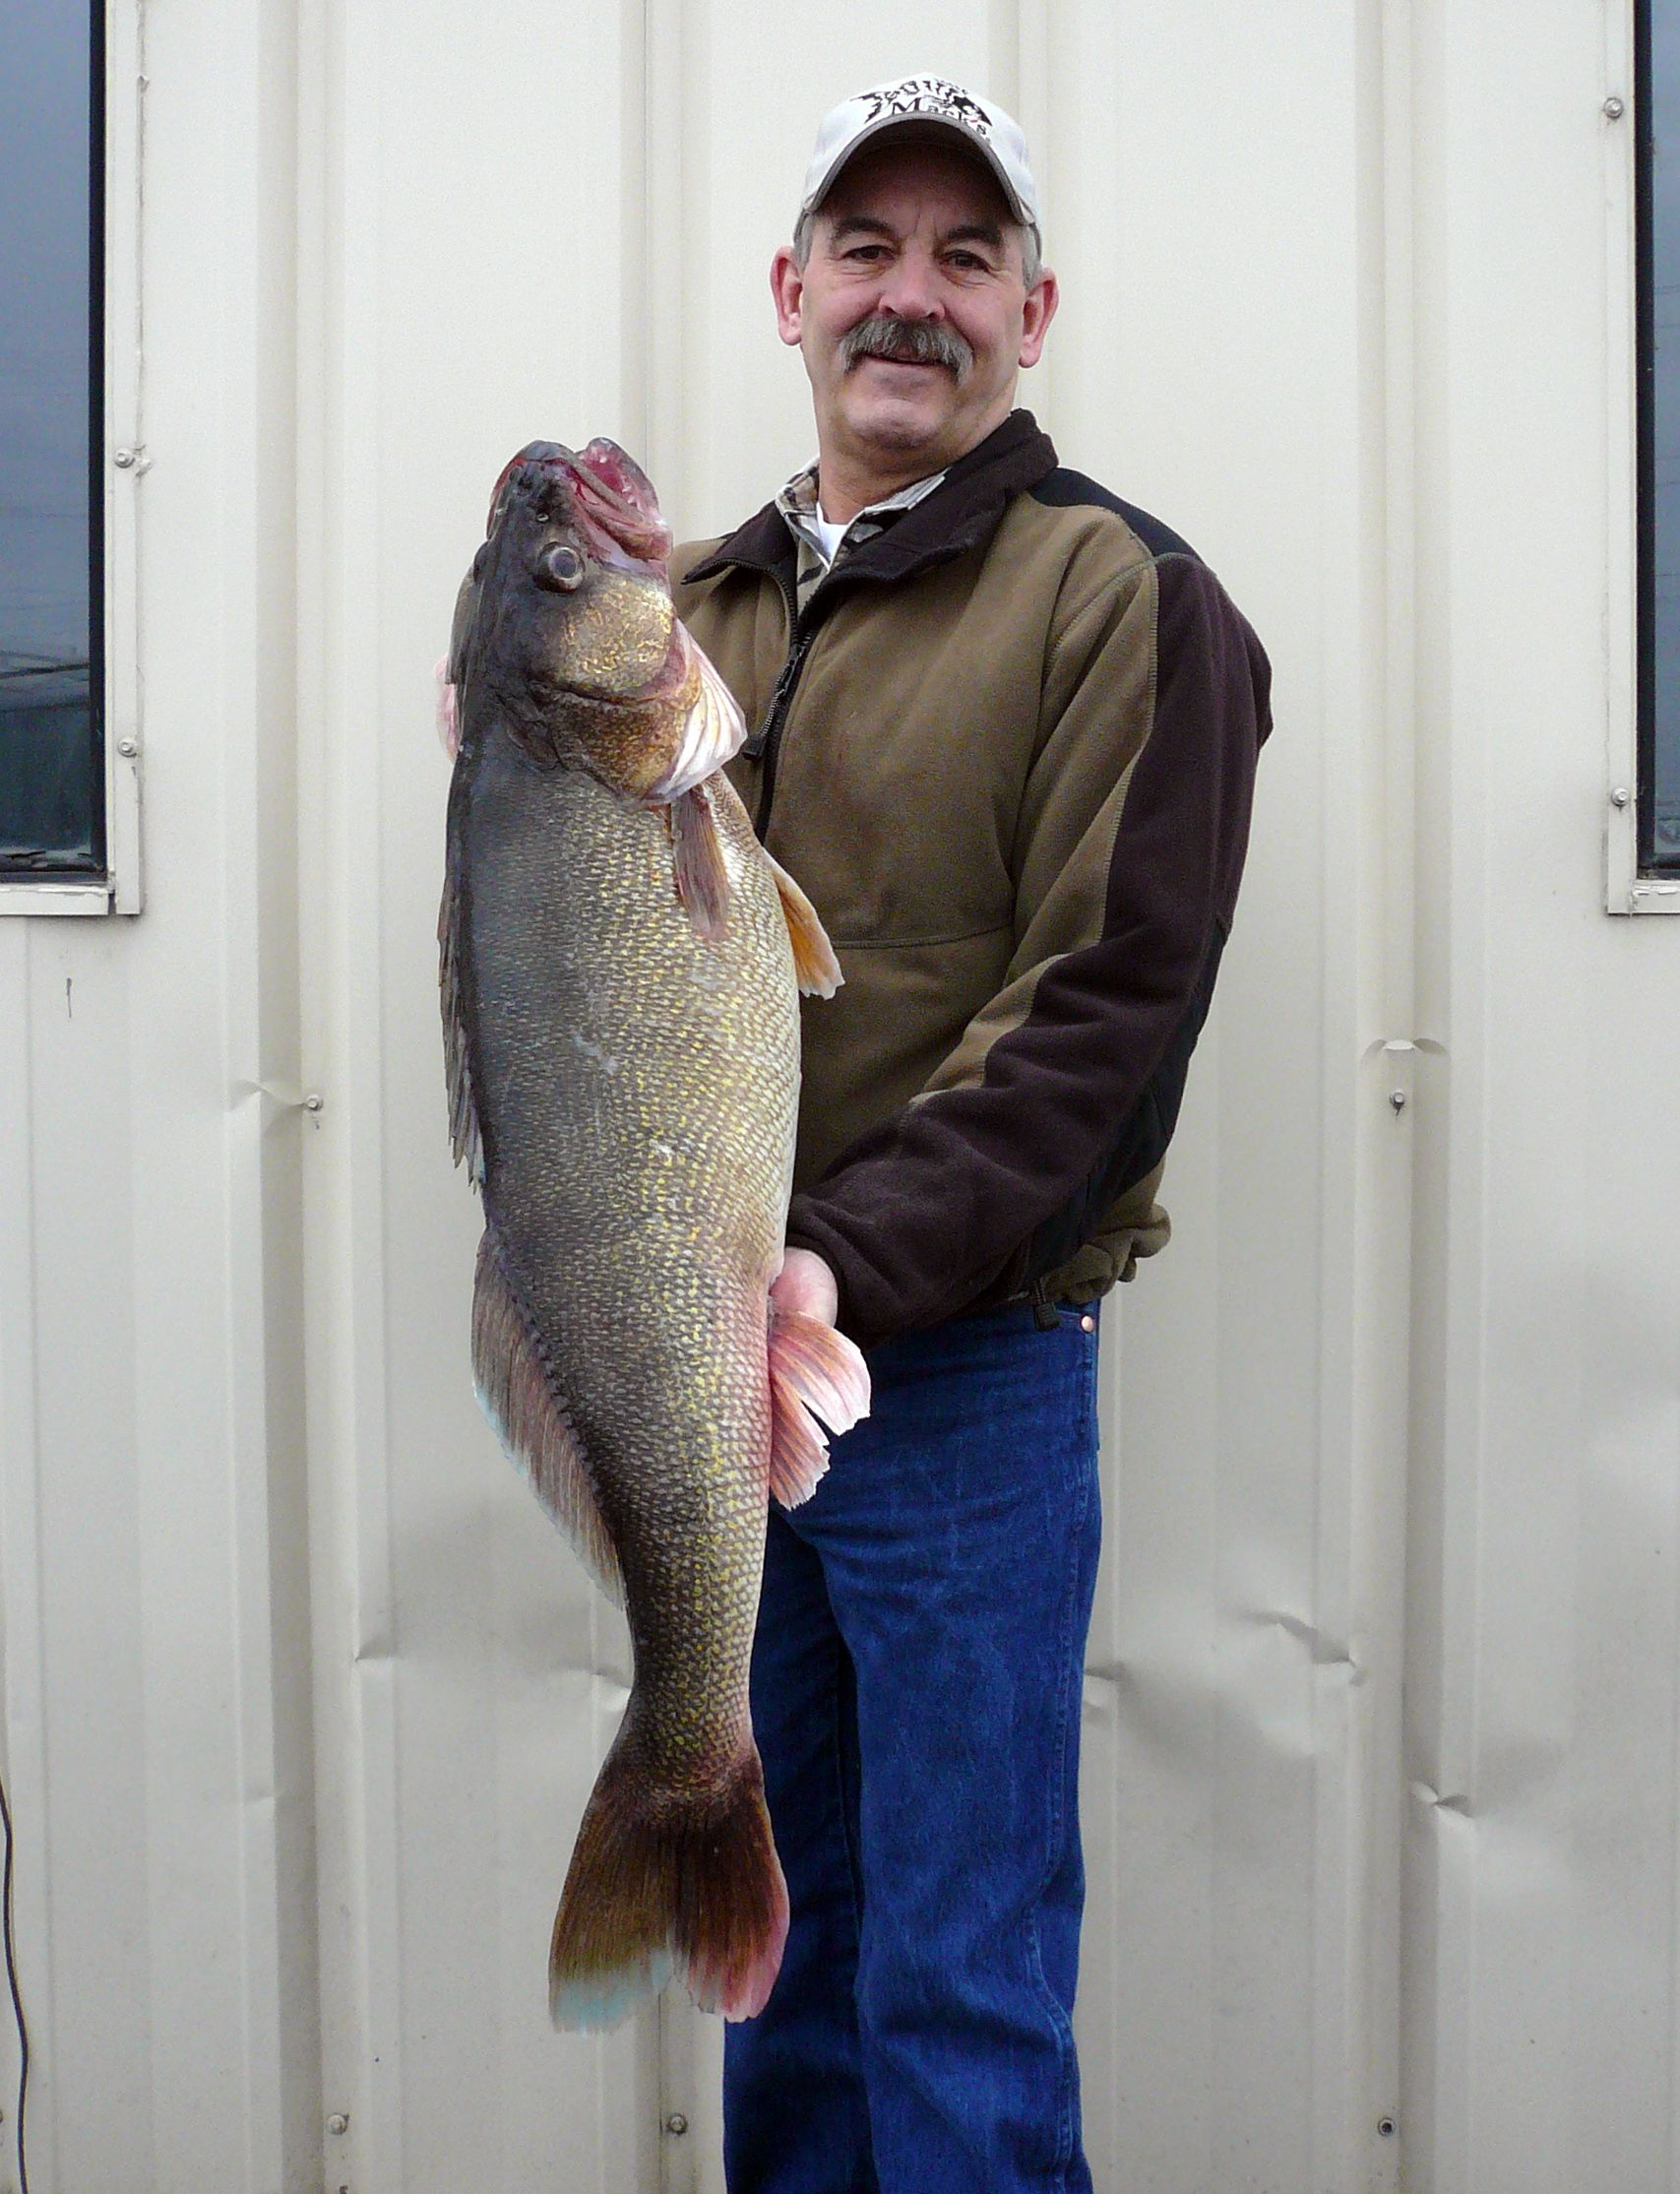 Pasco angler criticized for keeping record walleye - The Columbian